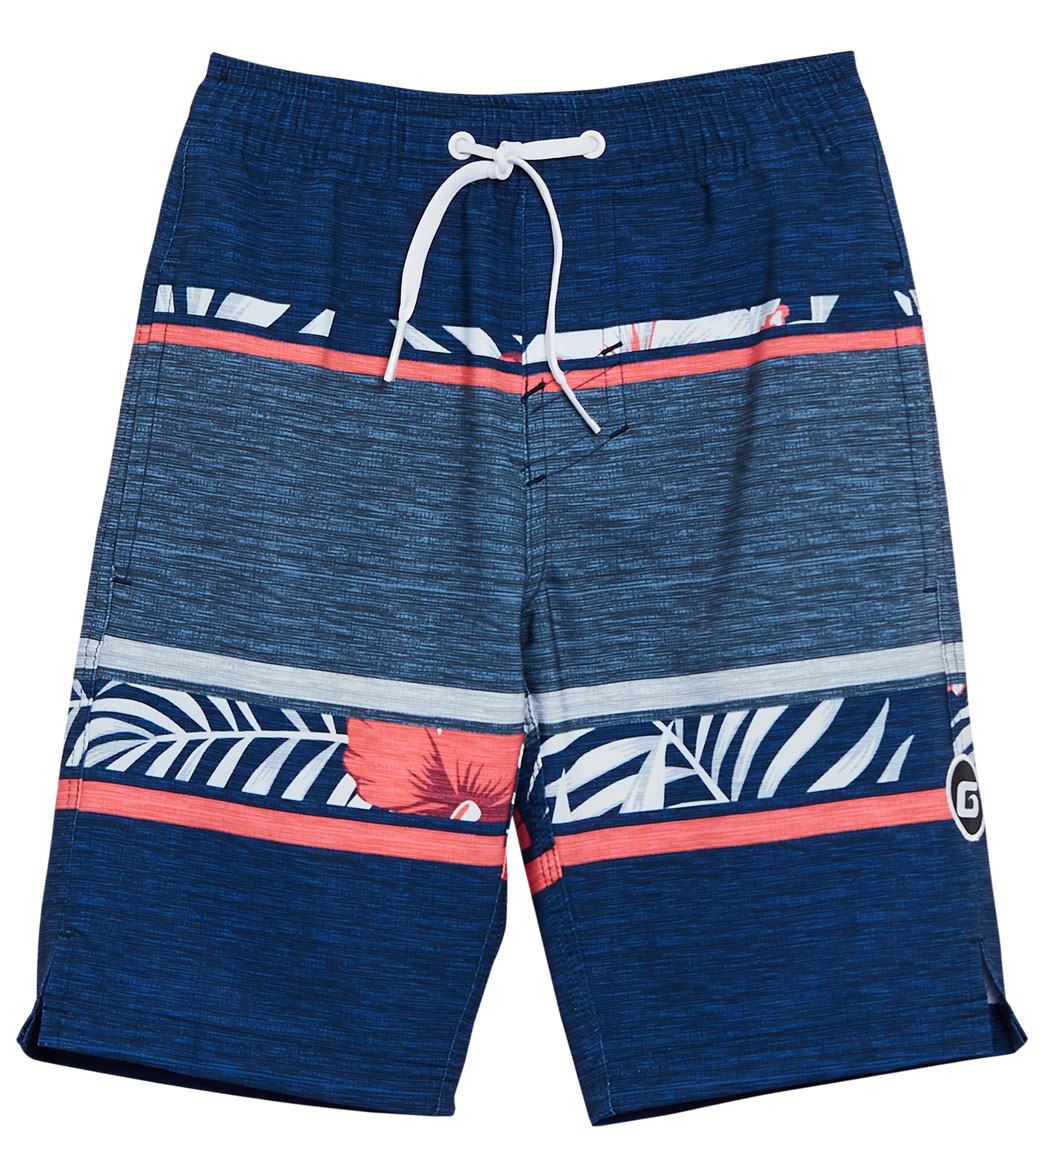 Grom Boys' Top Side Elastic Boardshorts Big Kid - Charcoal Large 10/12 Polyester/Spandex - Swimoutlet.com